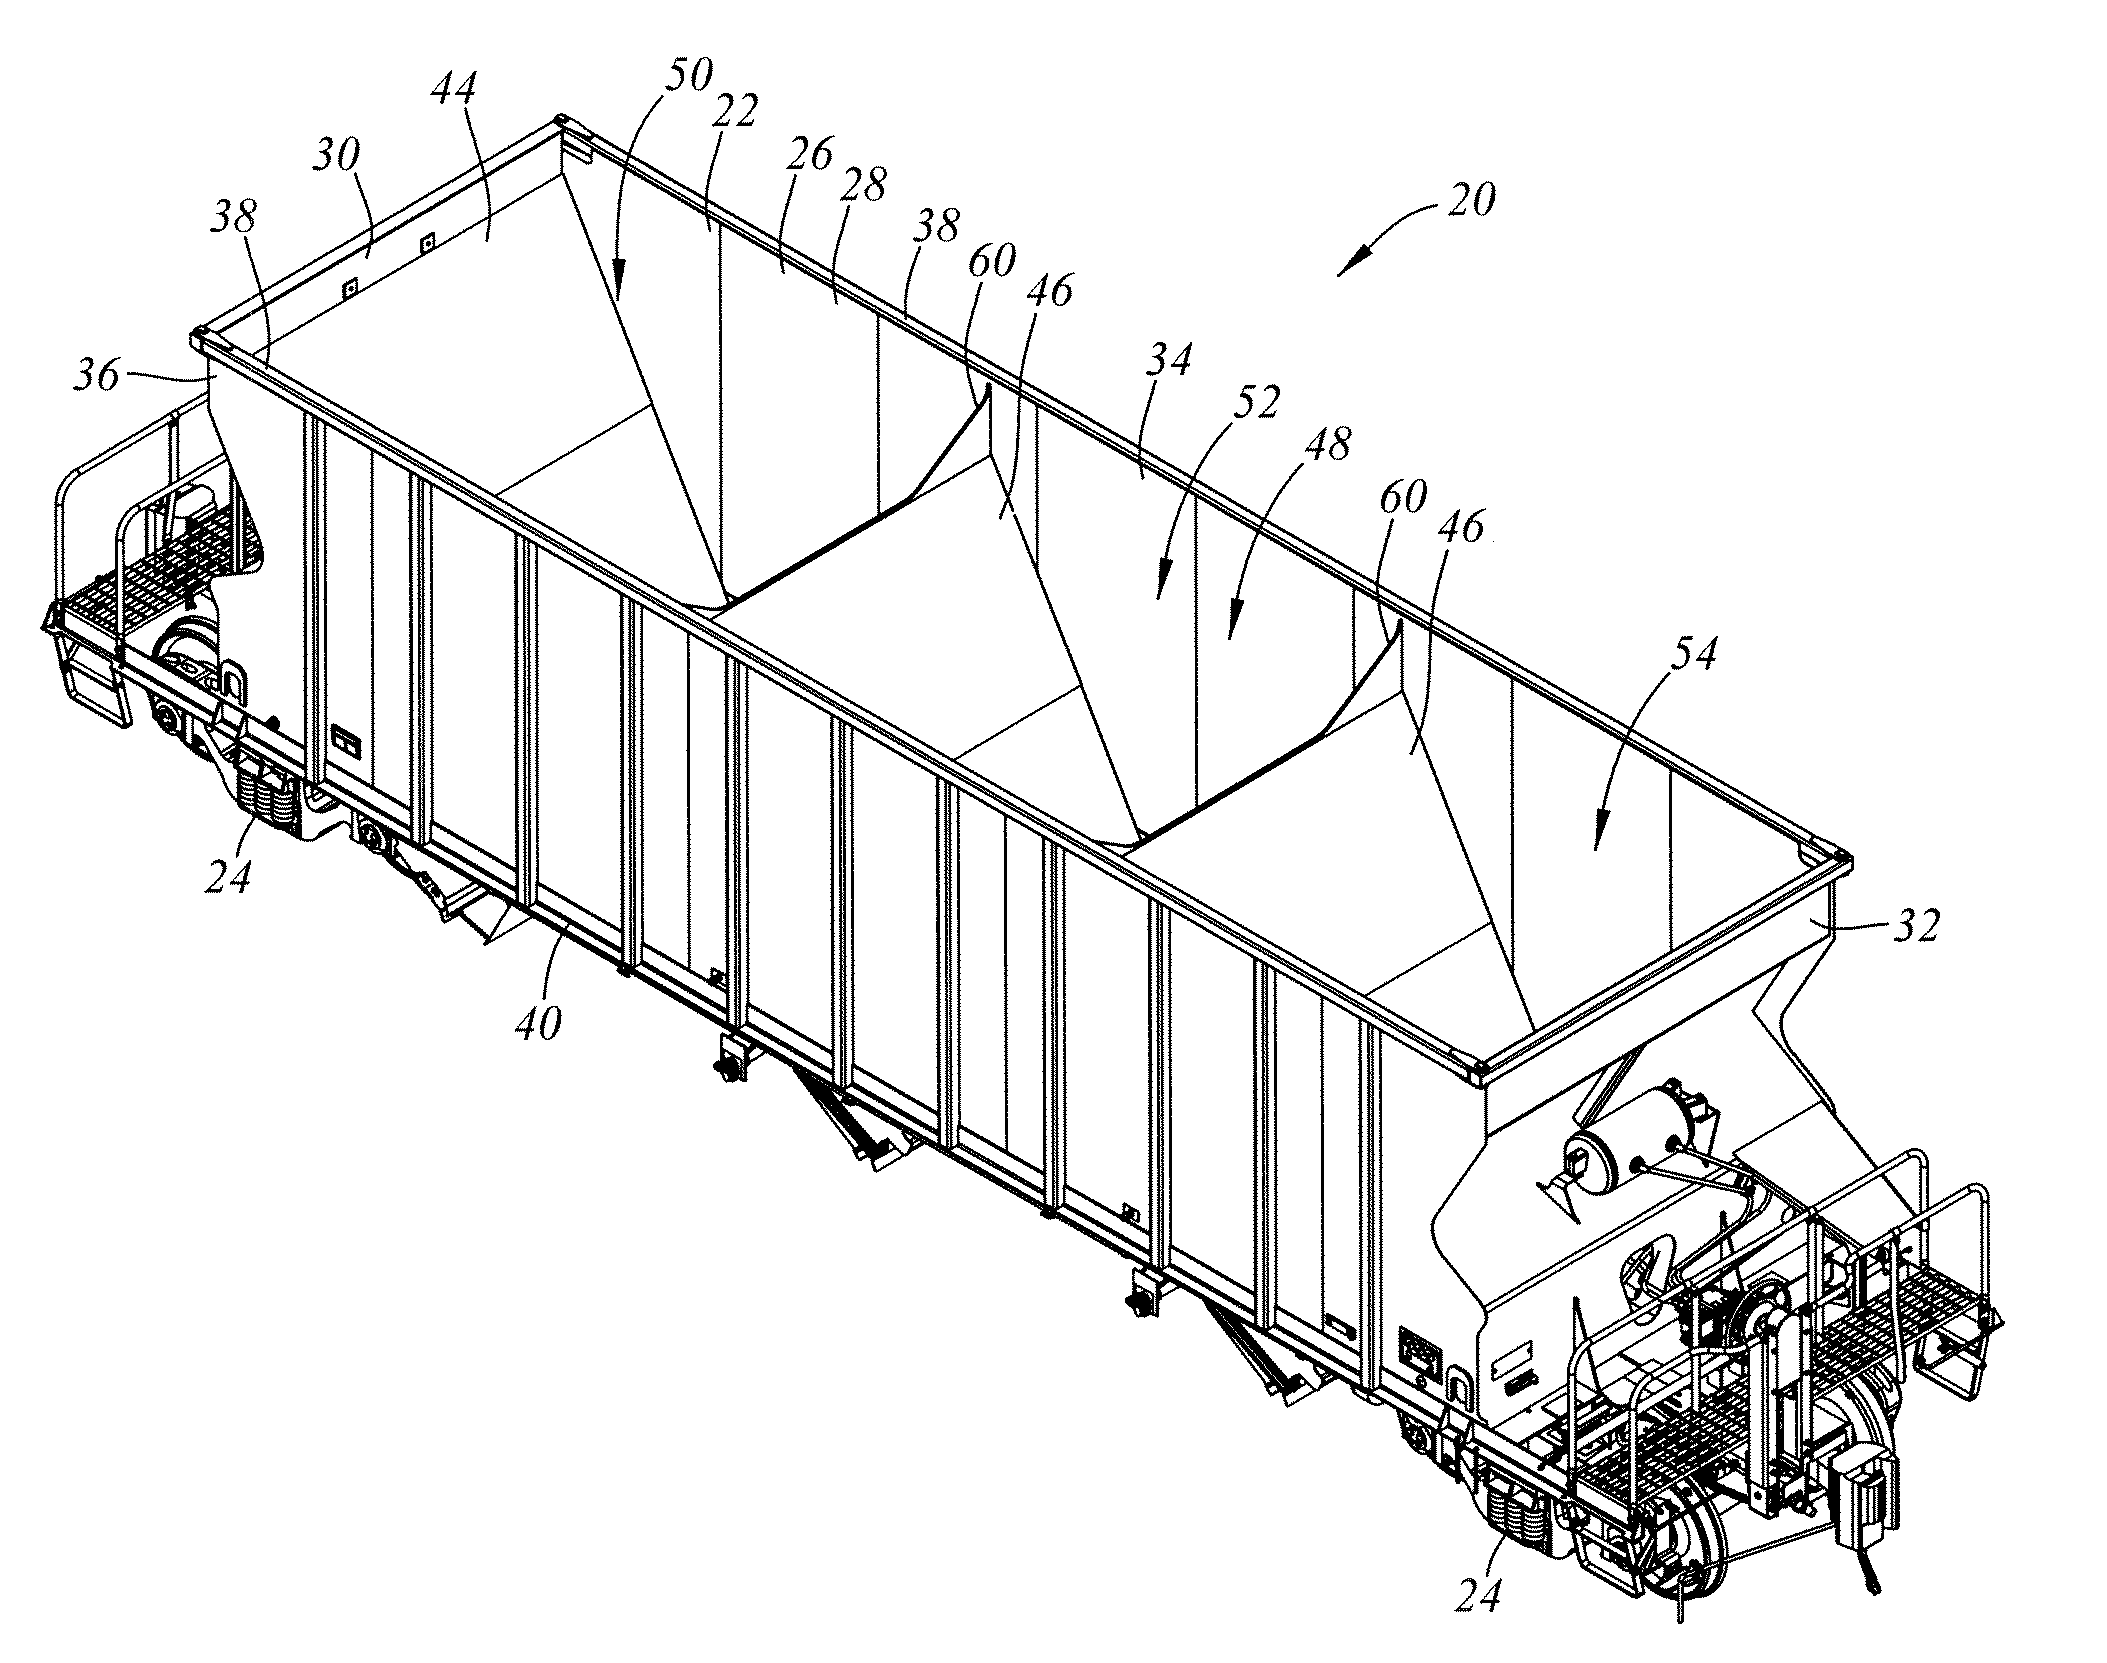 Rail road hopper car fittings and method of operation